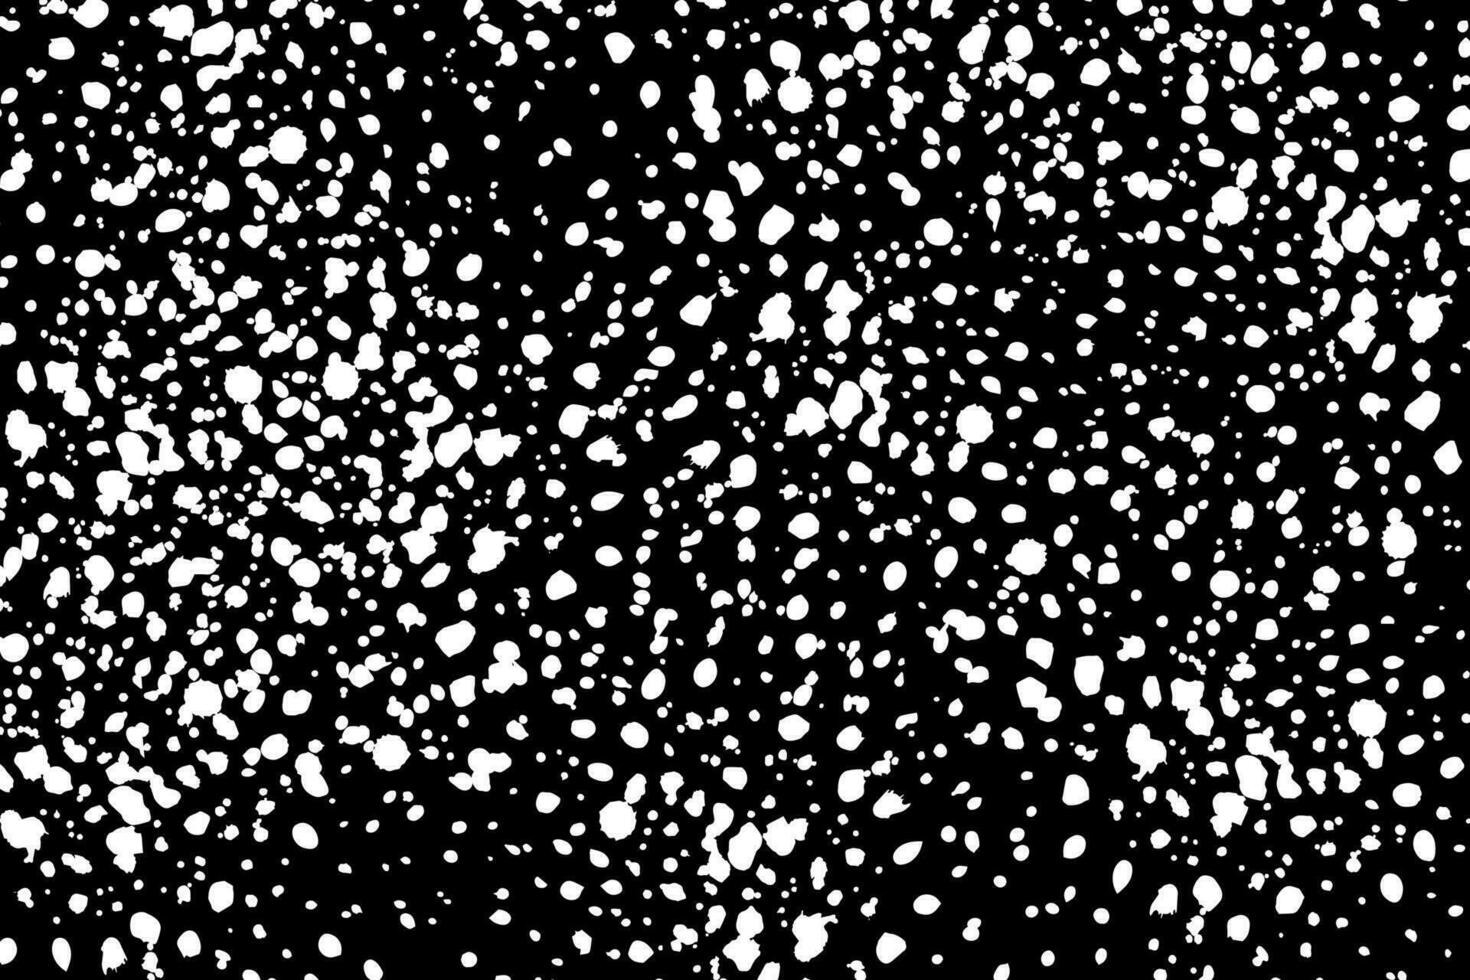 Premium background of white spots on a black background vector